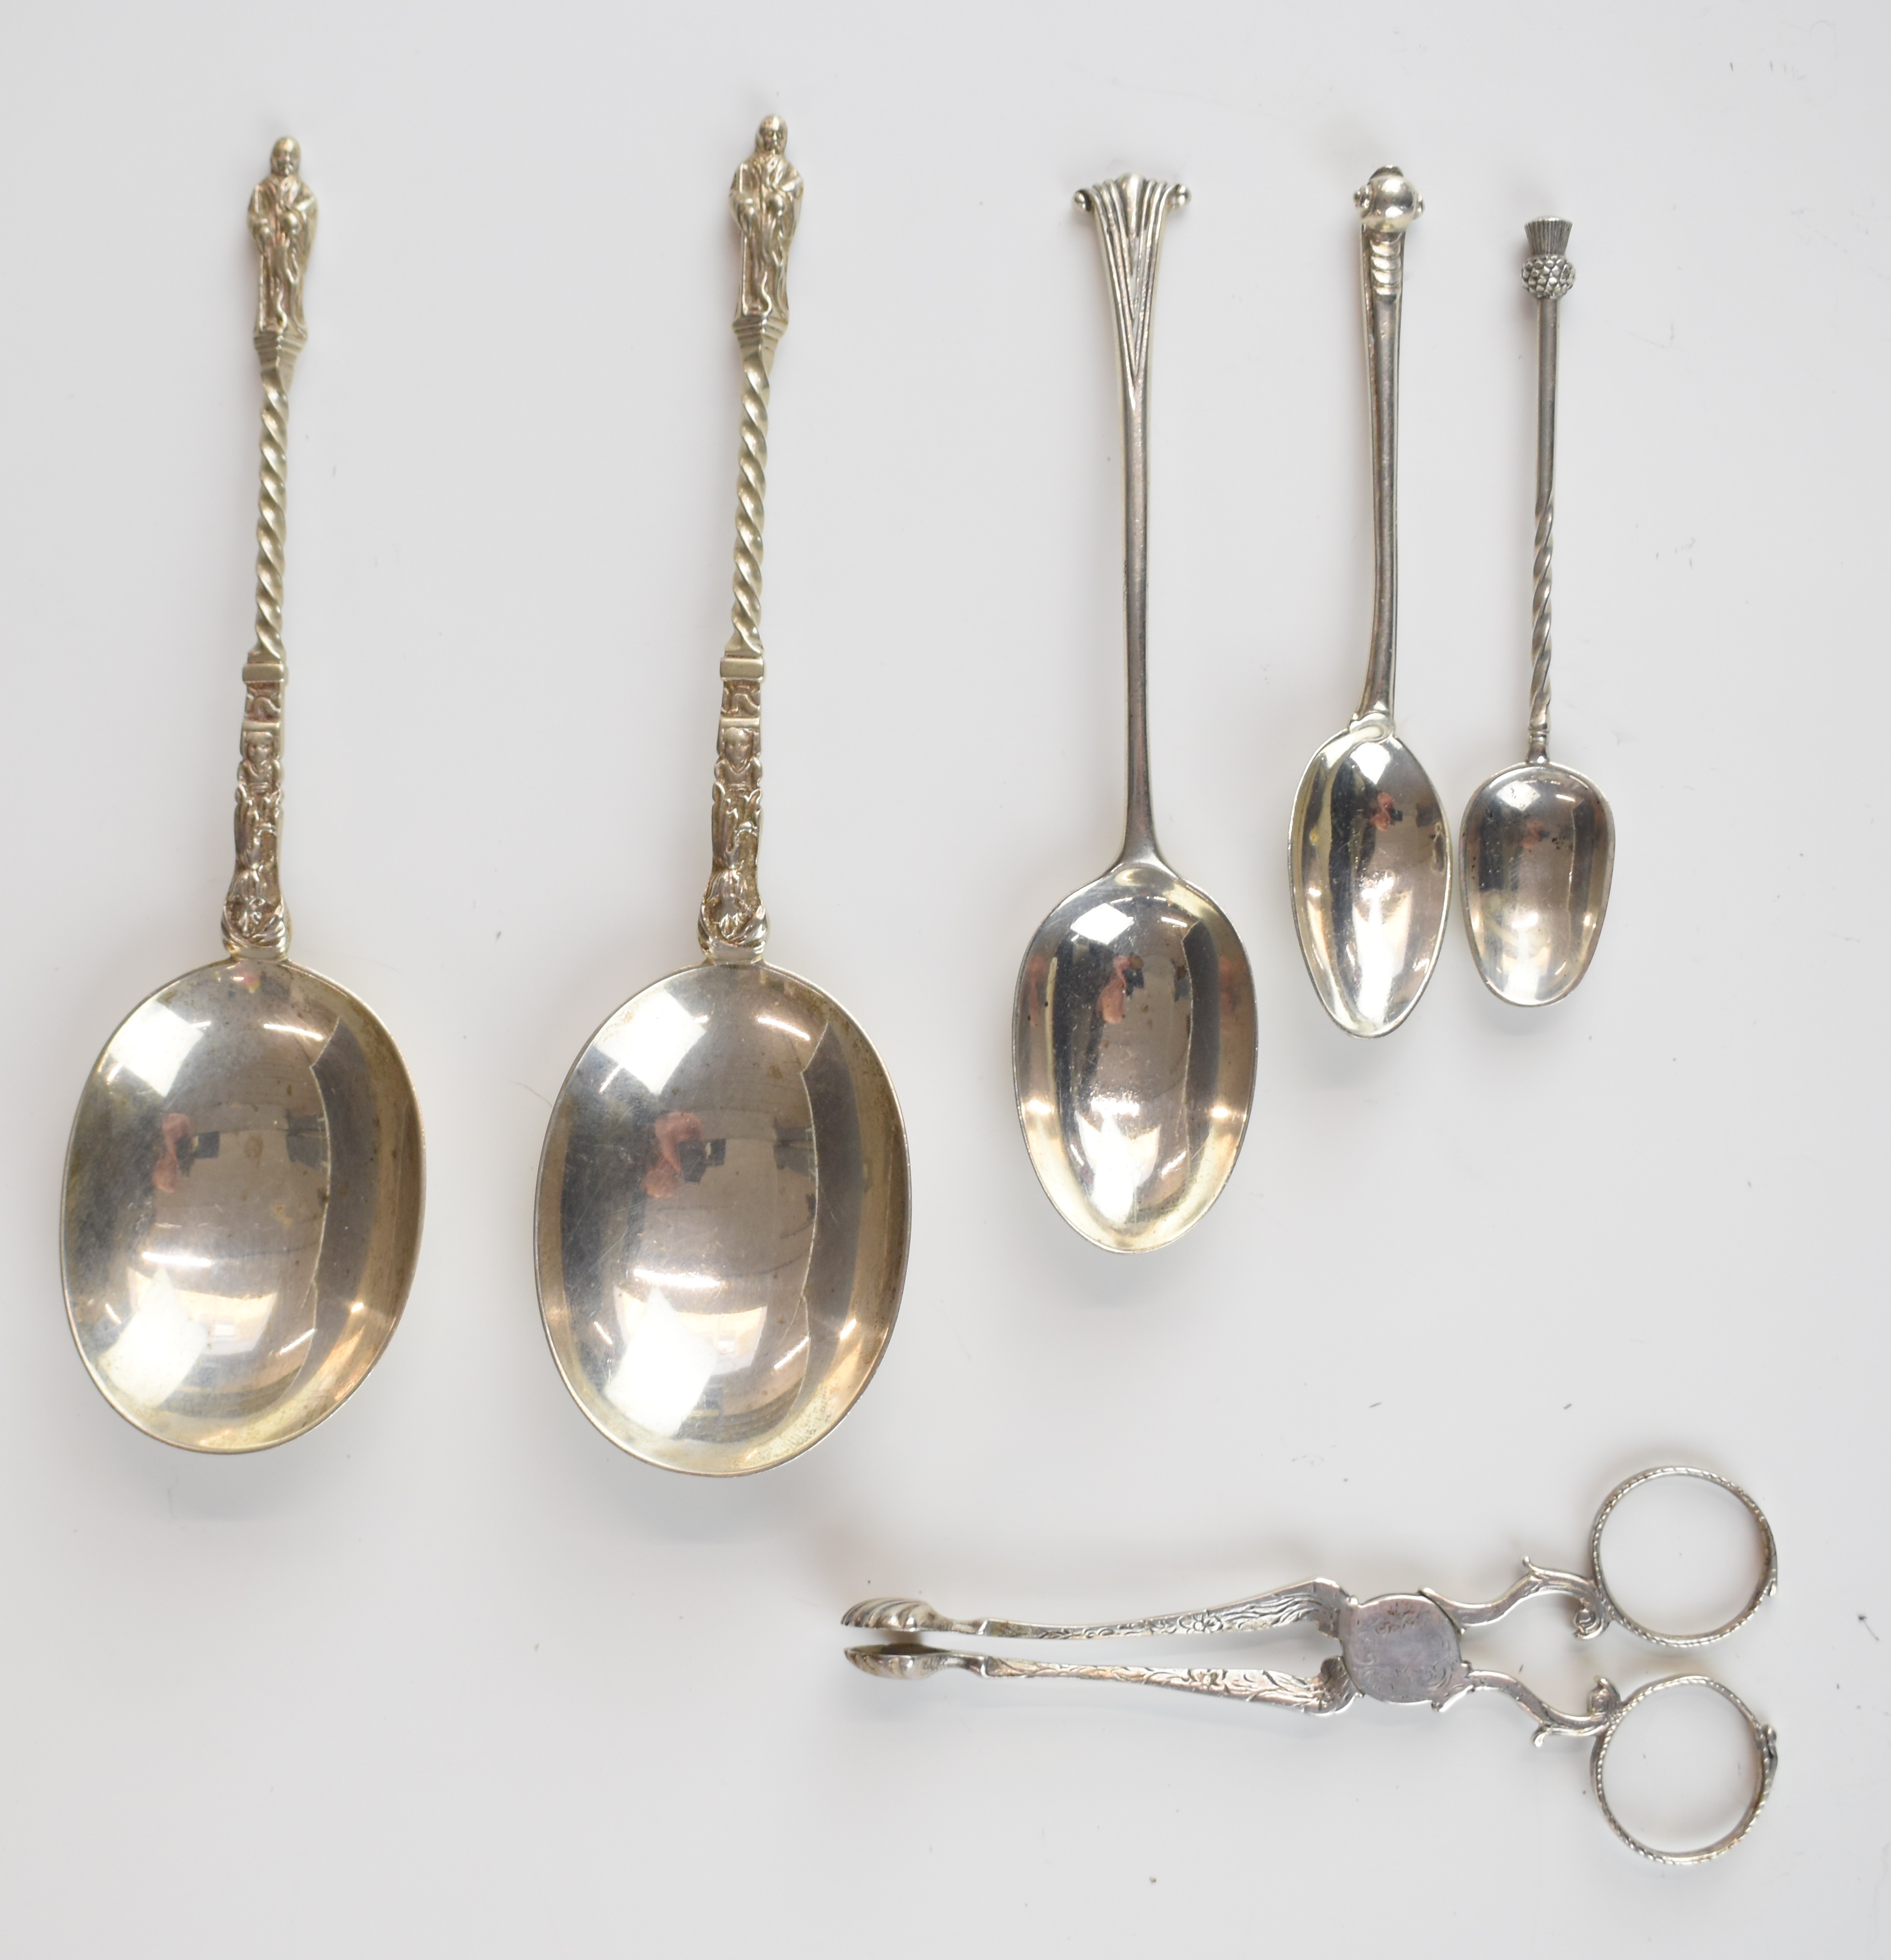 Georgian and later hallmarked silver cutlery including sugar nips and a pair of apostle or similar